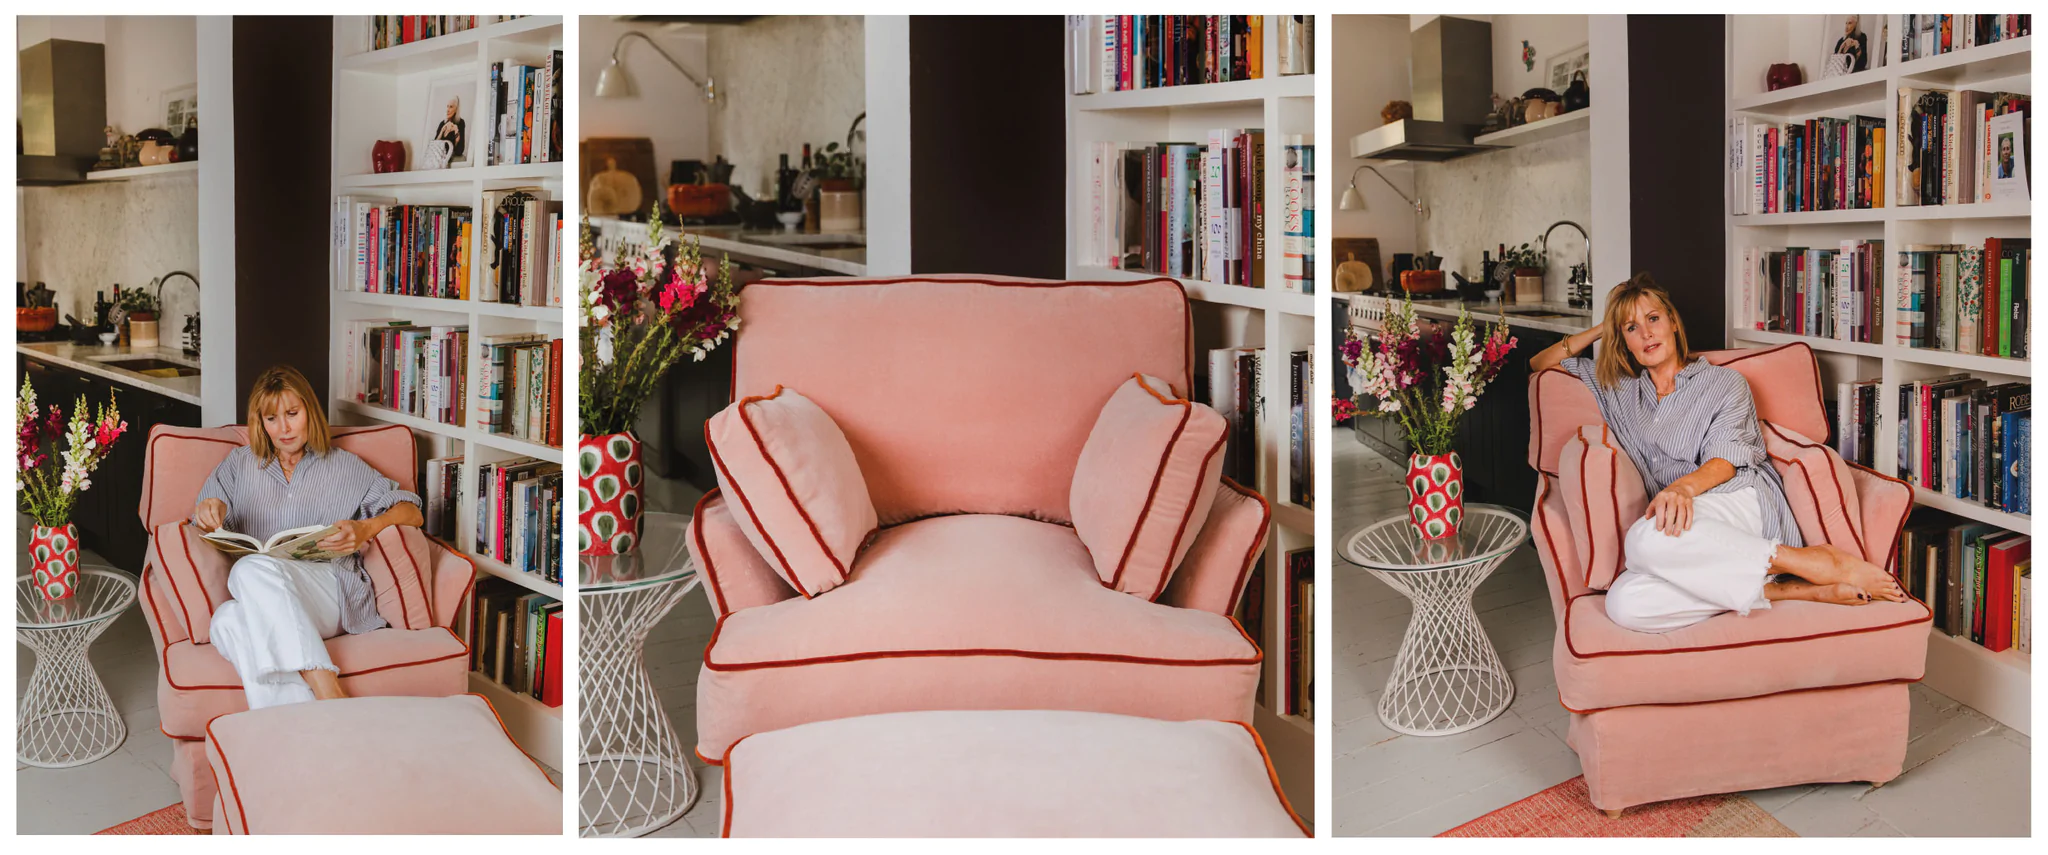 Skye Gyngell curled up reading in her Plaster Pink Velvet Otter Box Little Armchair with Paprika Contrast by Maker and Son